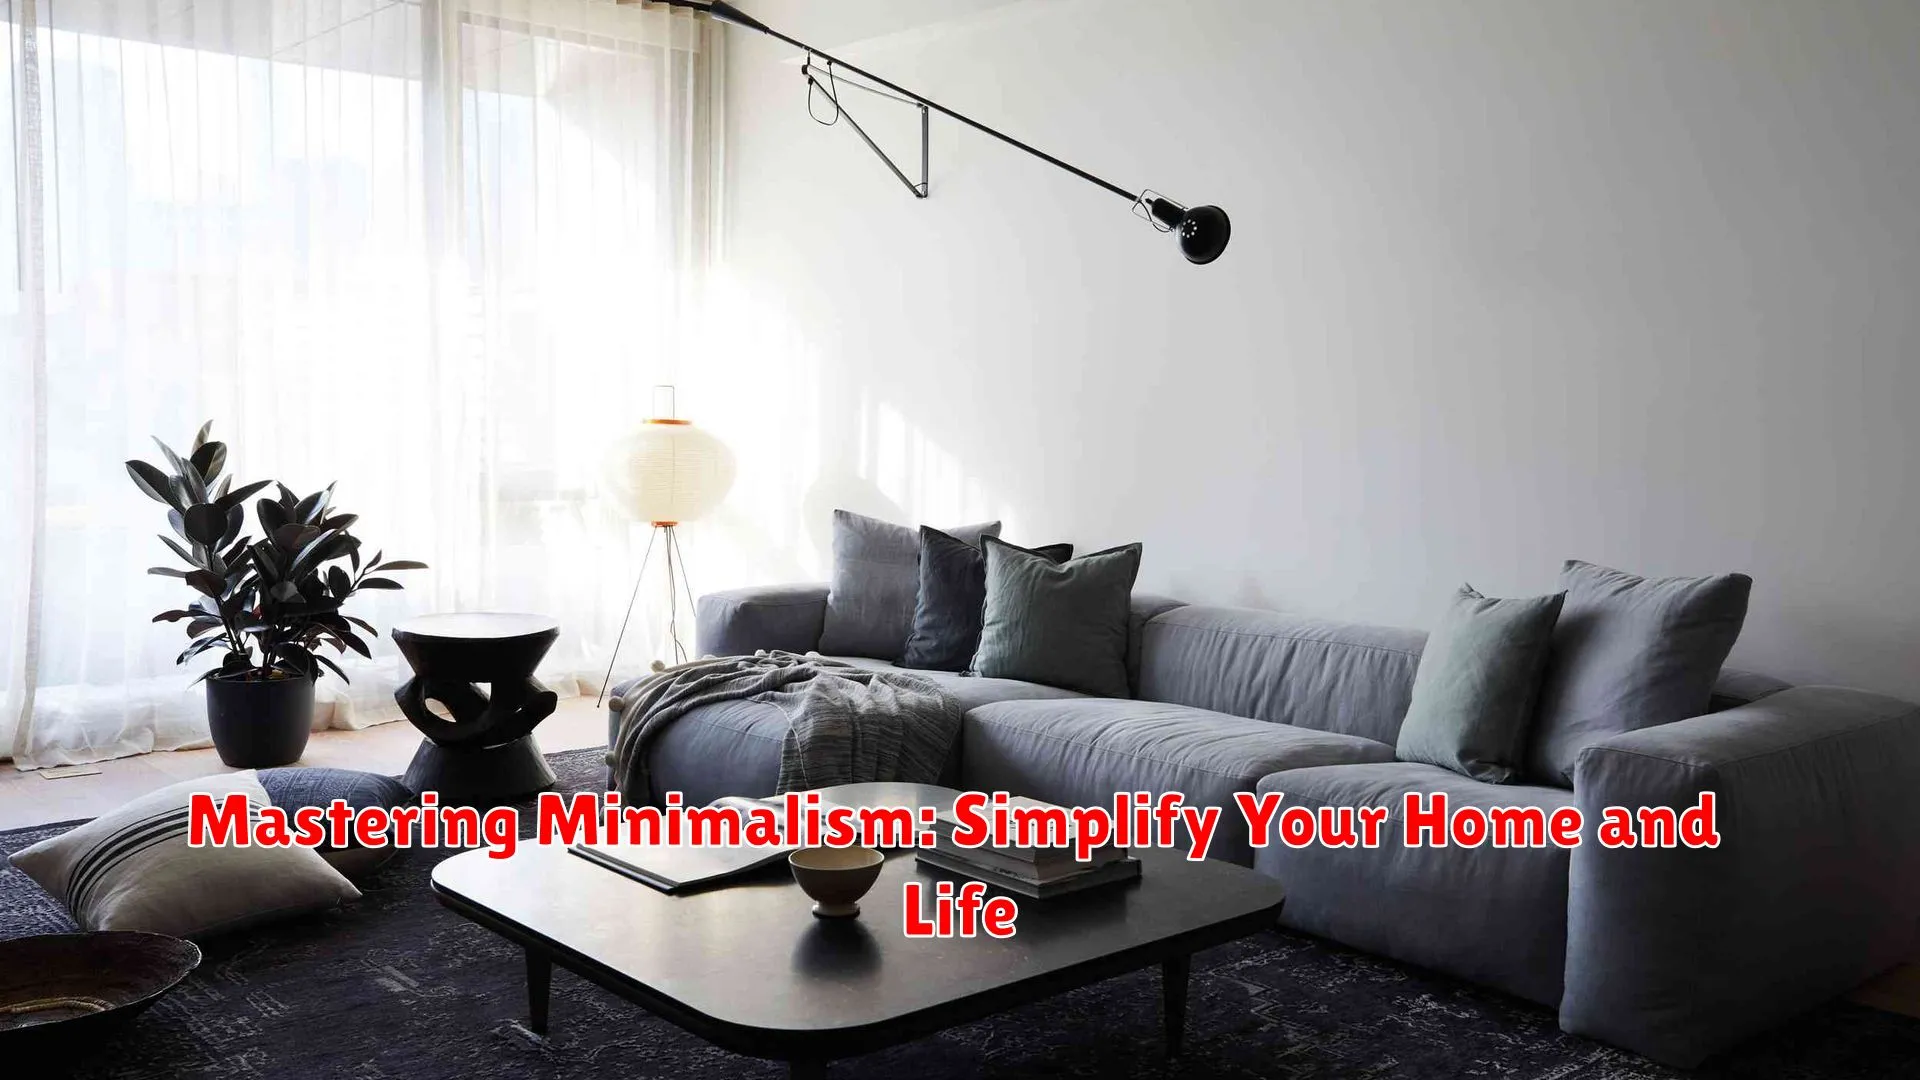 Mastering Minimalism: Simplify Your Home and Life